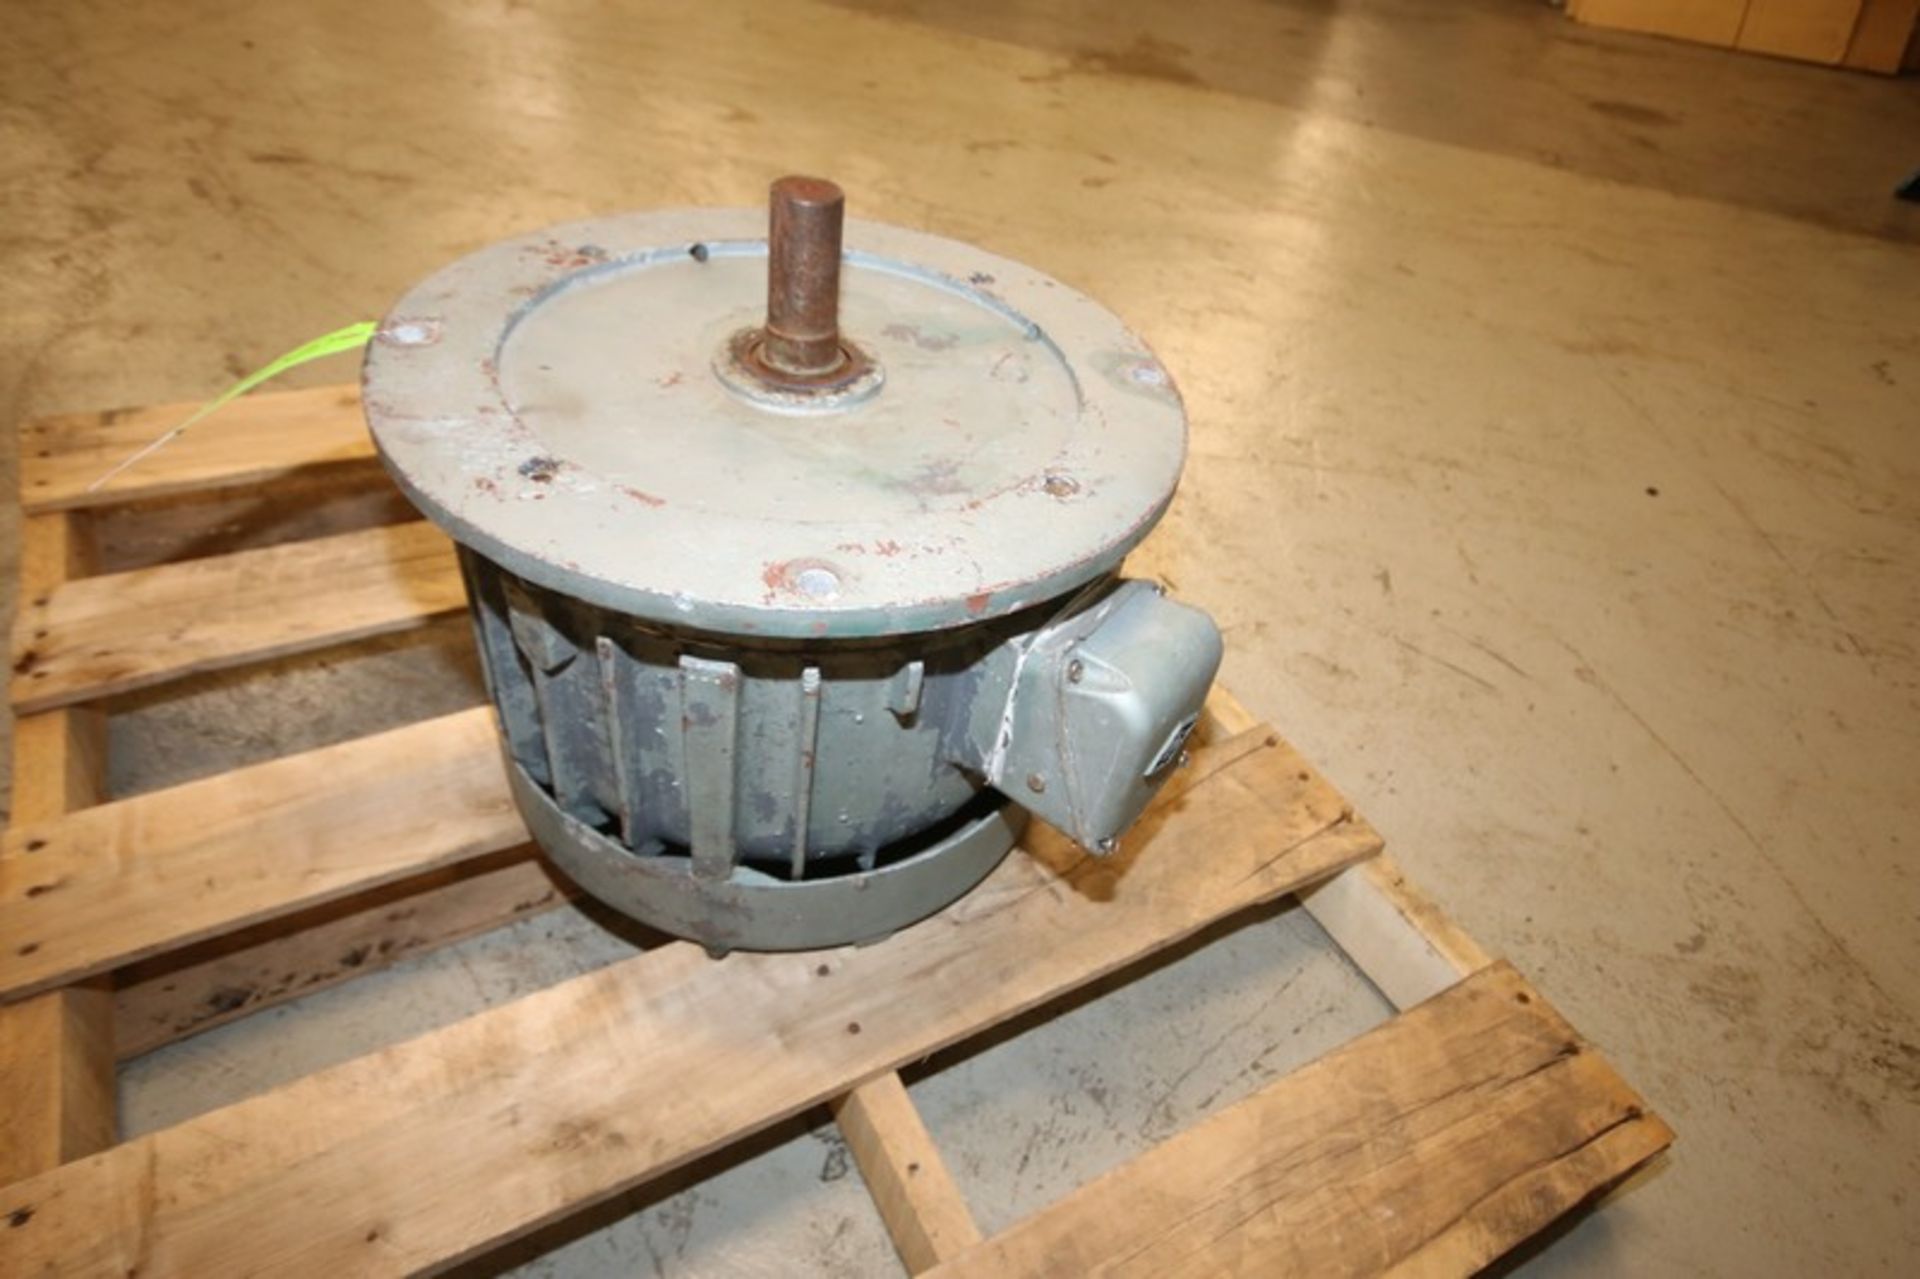 Likwifier / Blender Spare Motor, Aprox. 20 hp, (ID Plate Missing) (INV#96711) (Located @ the MDG - Image 3 of 3